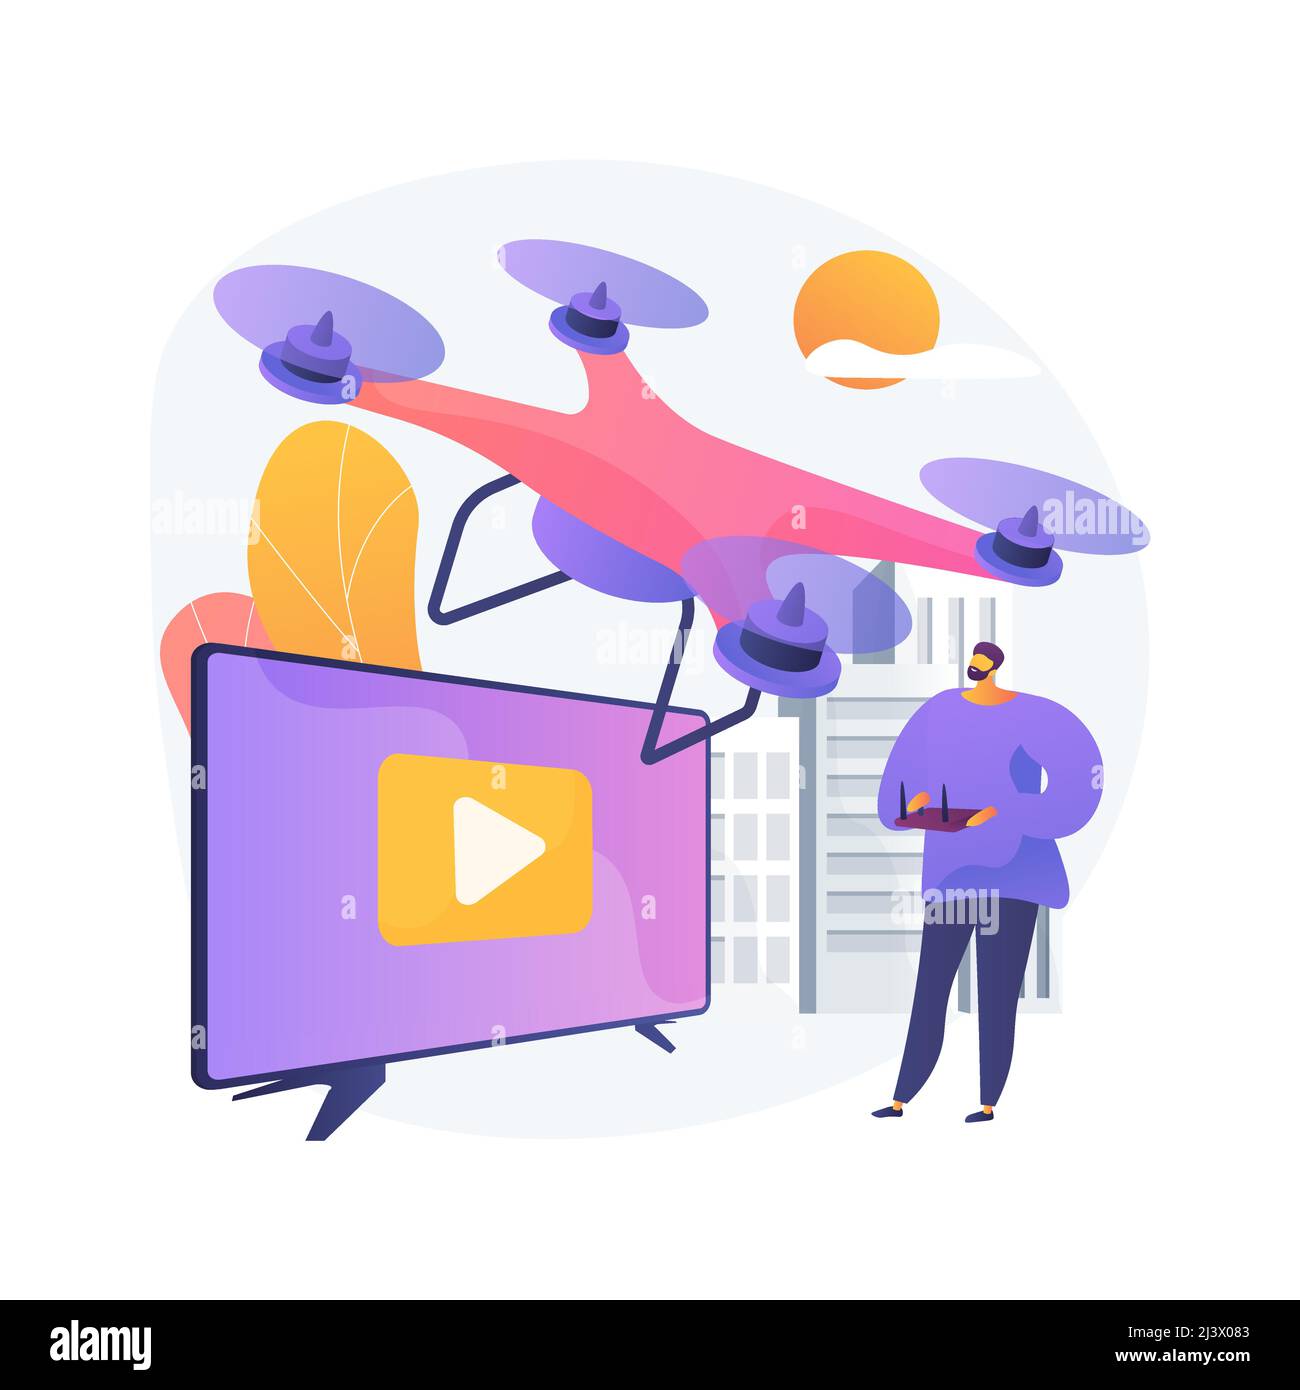 Aerial videography abstract concept vector illustration. Aerial drone service, videography company, professional video production, event film, commerc Stock Vector